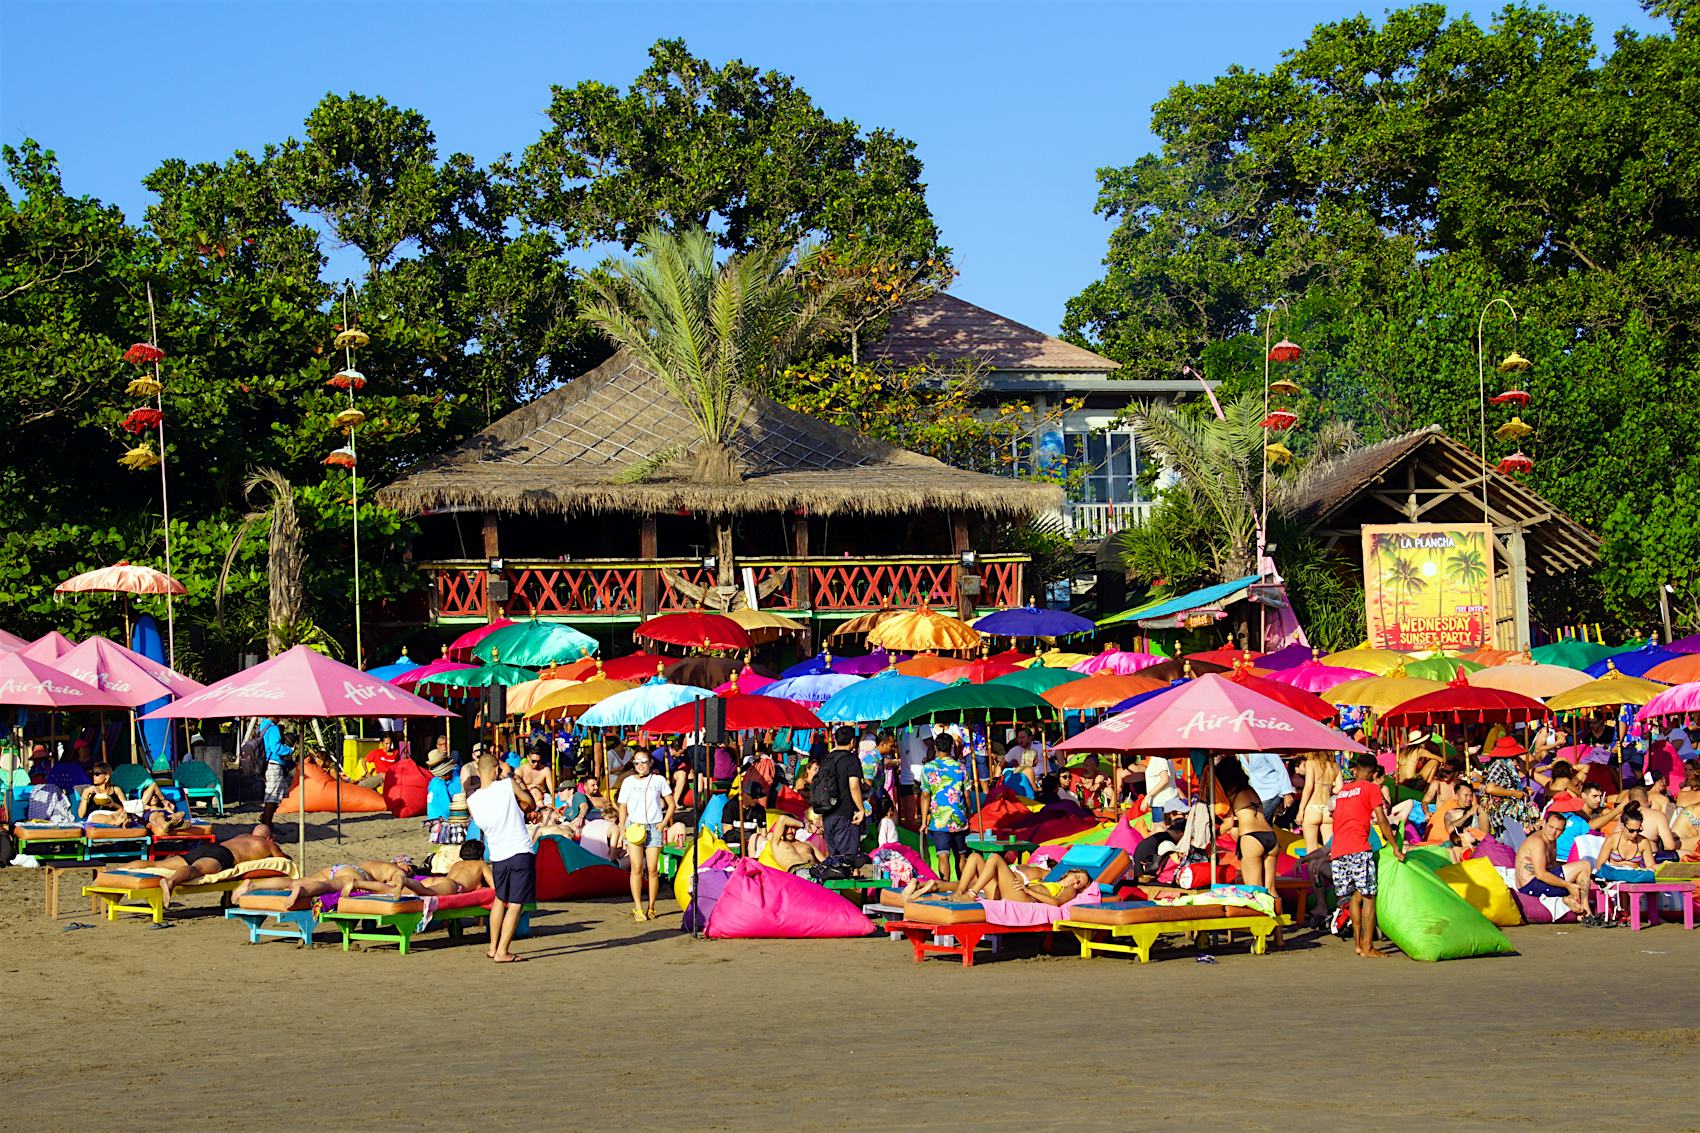 August 14, 2018: A crowd of people under colourful umbrellas outside La Plancha Beach Bar & Restaurant.